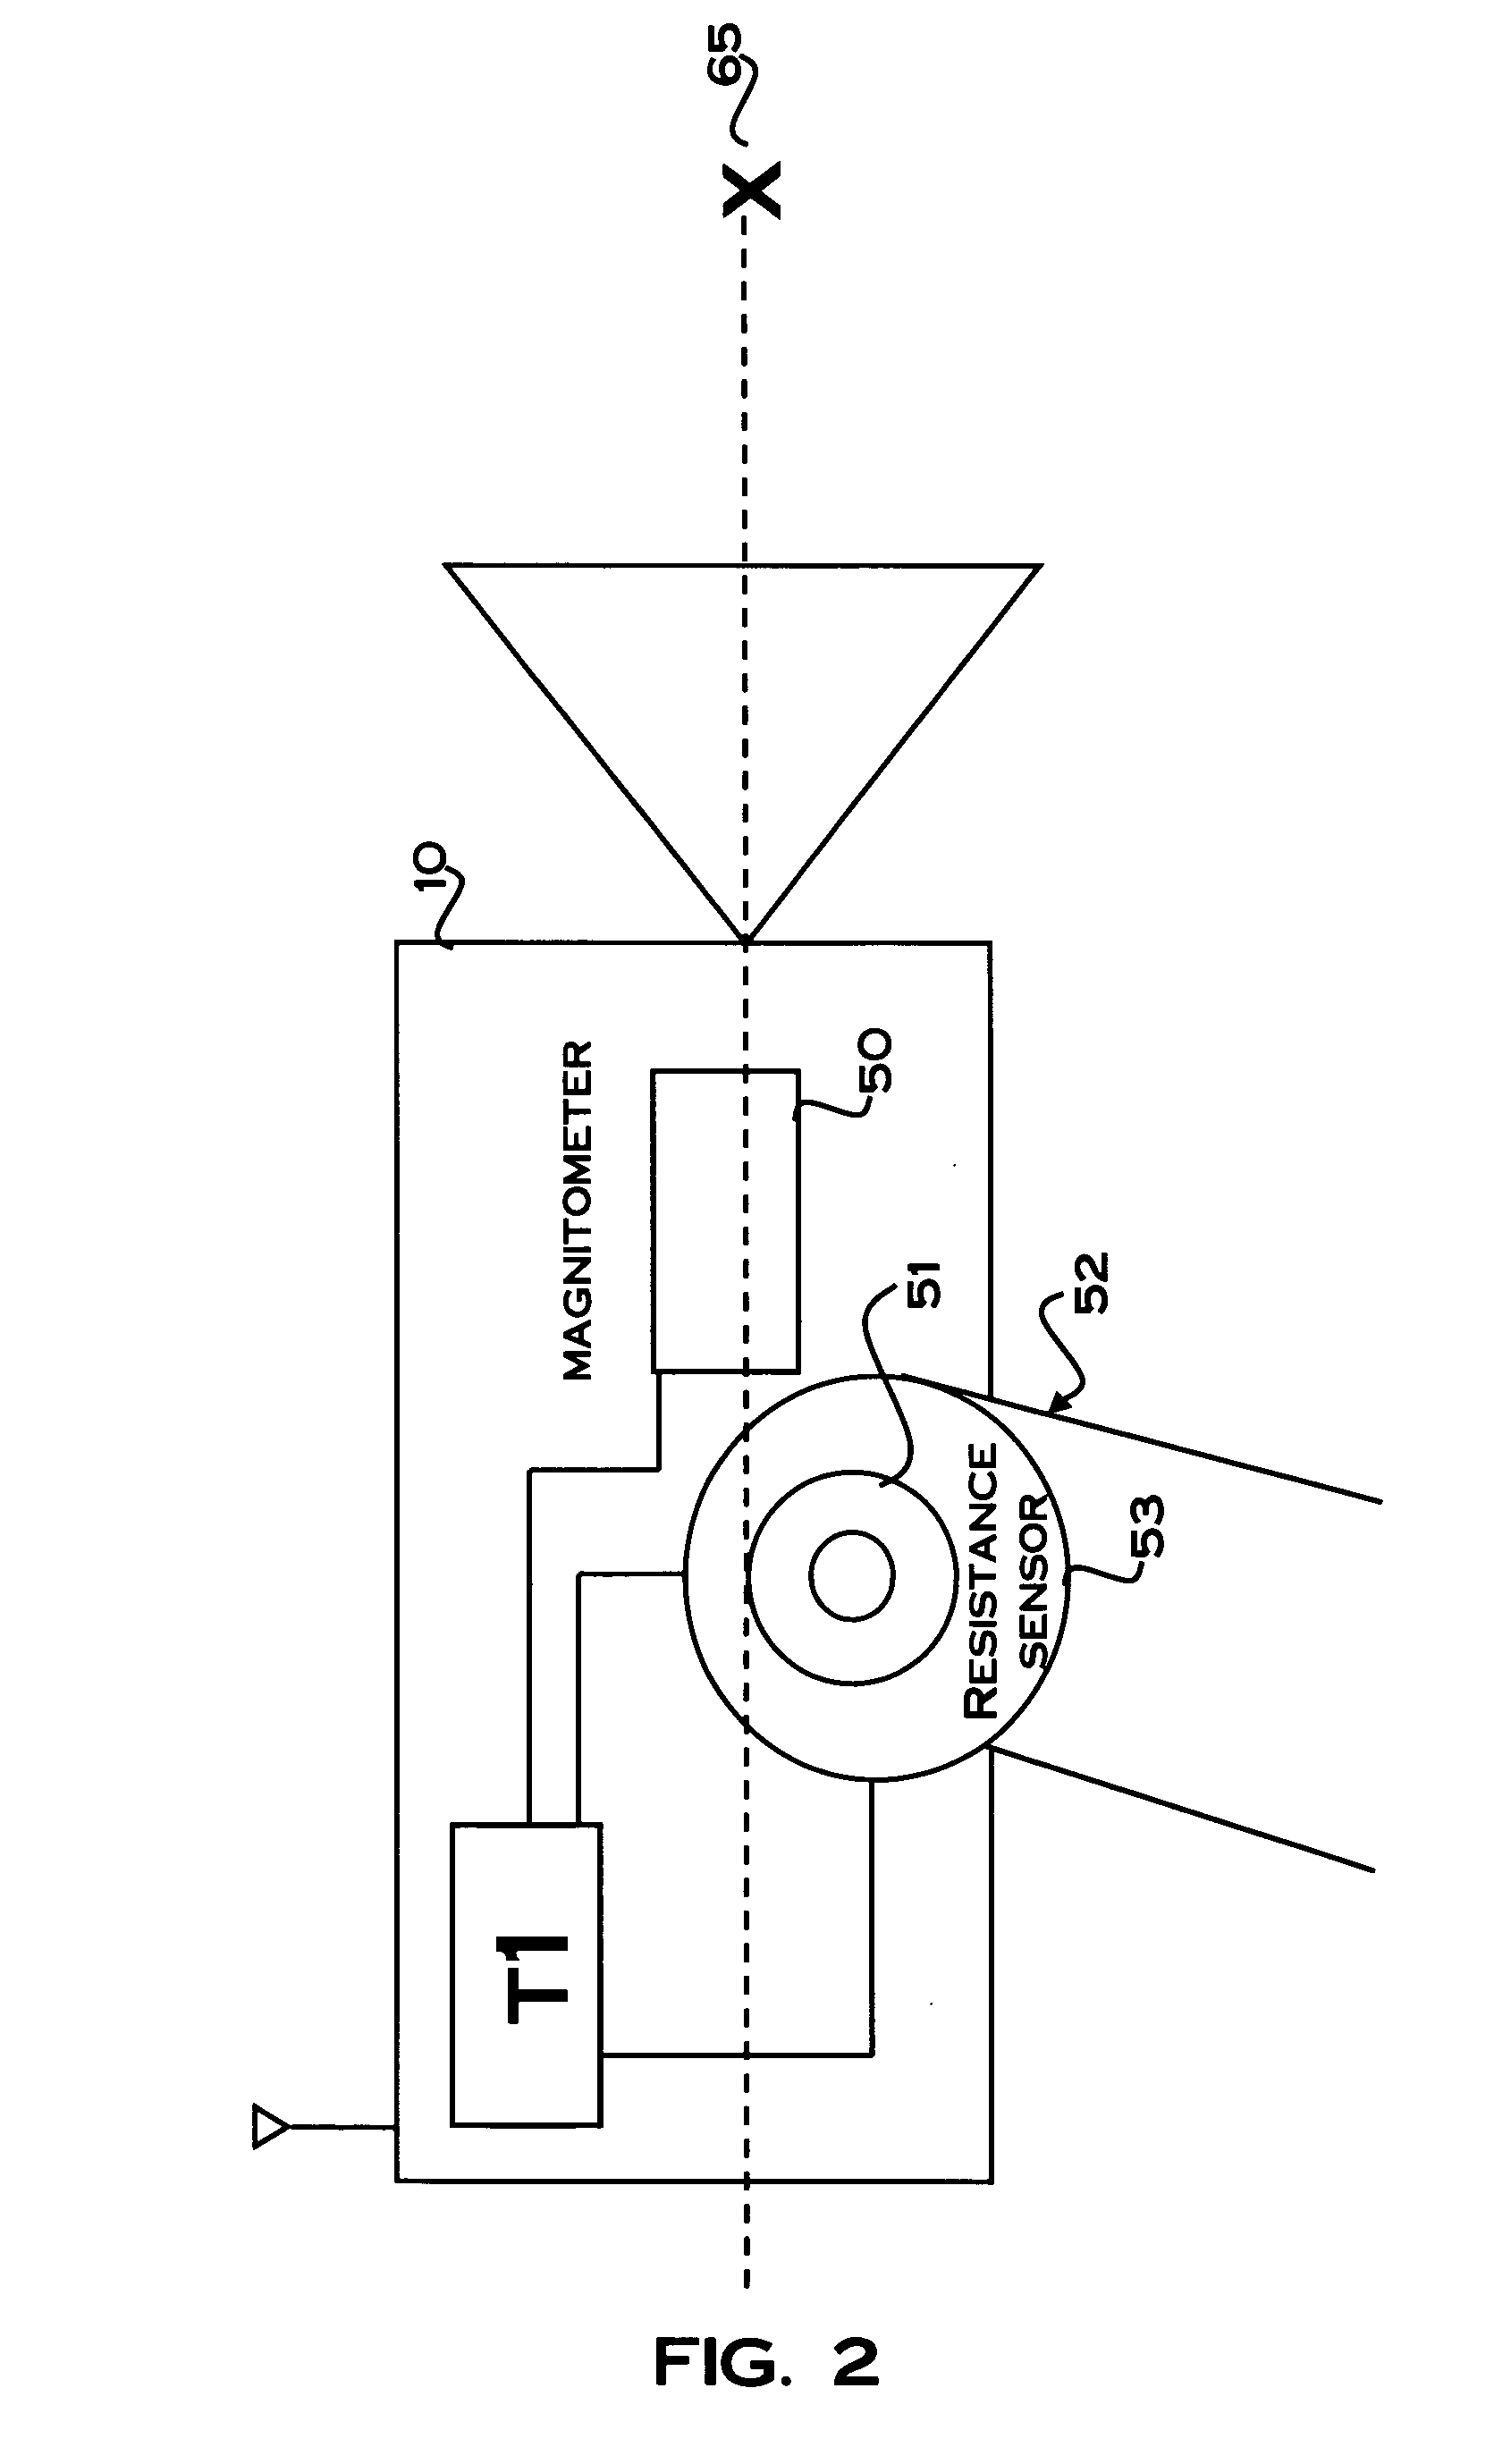 Method and system for automatically determining the camera field of view in a camera network